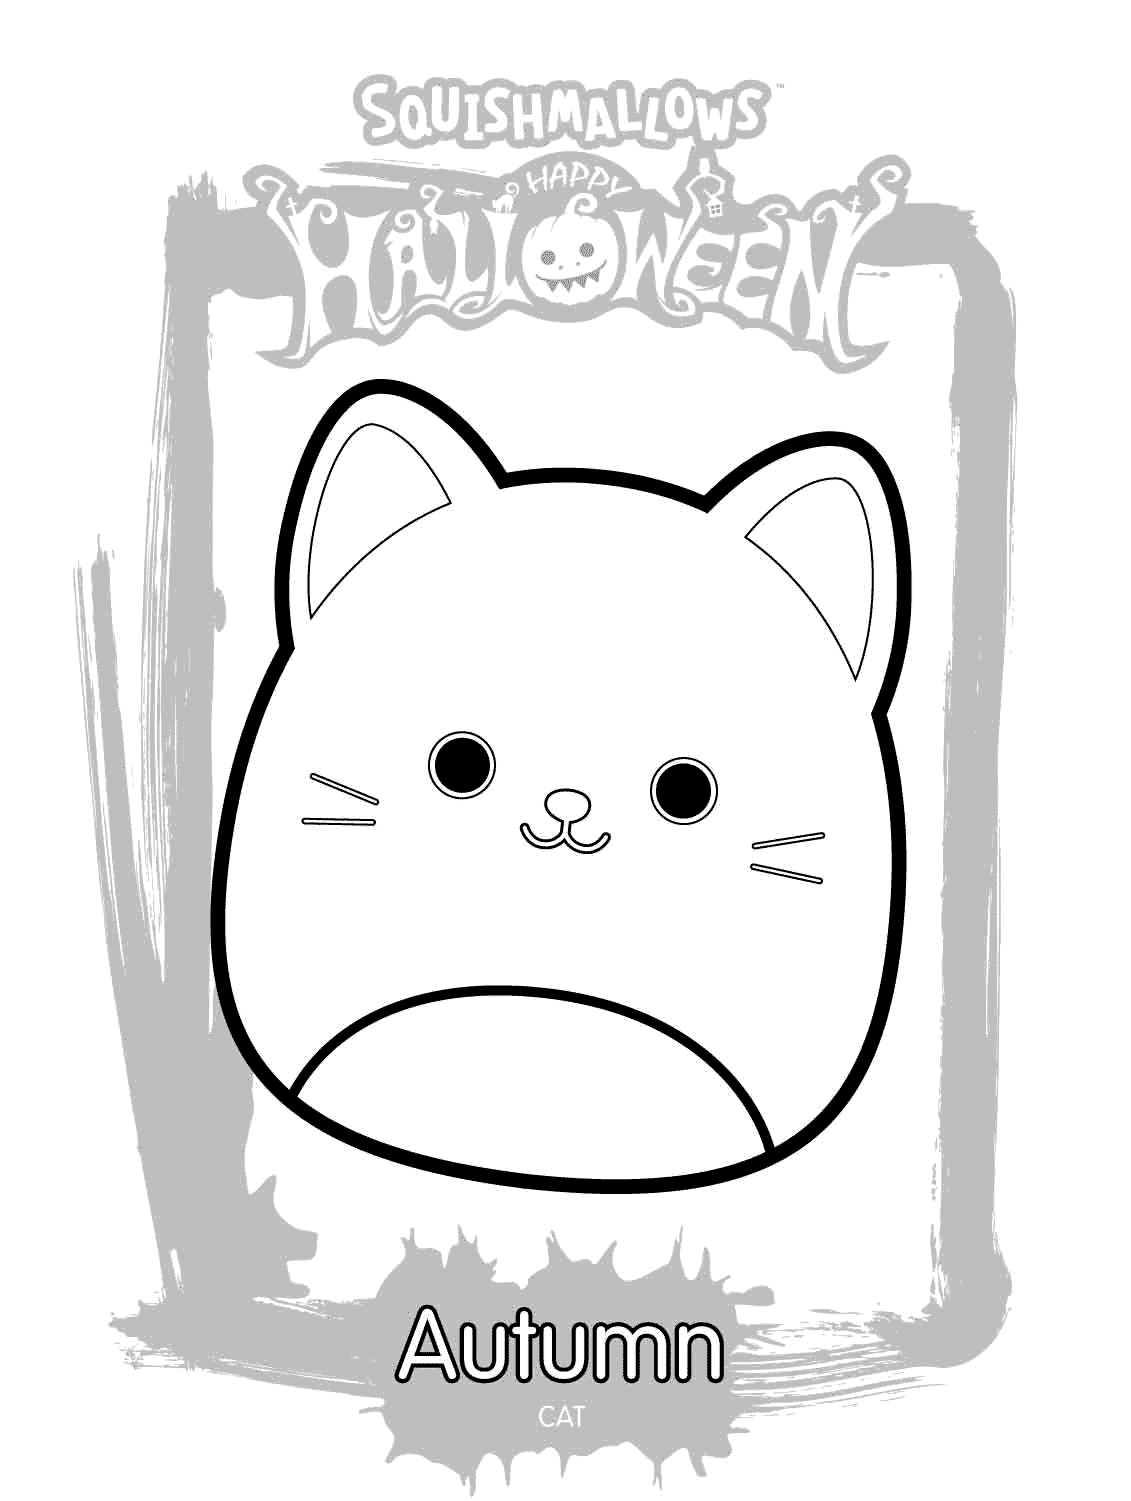 Squishmallows Autumn Coloring Pages